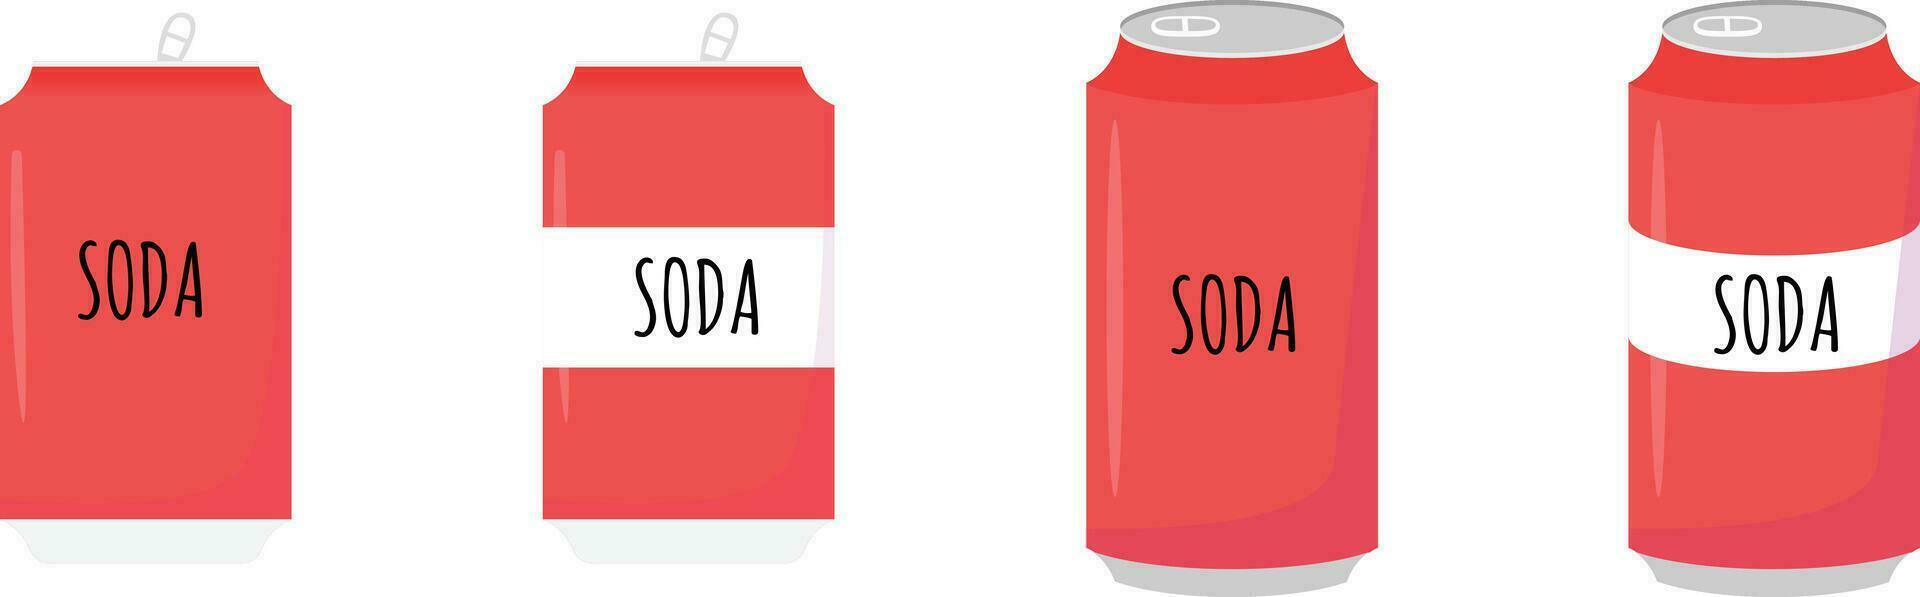 soda cola can red color fresh drink soft drink vector